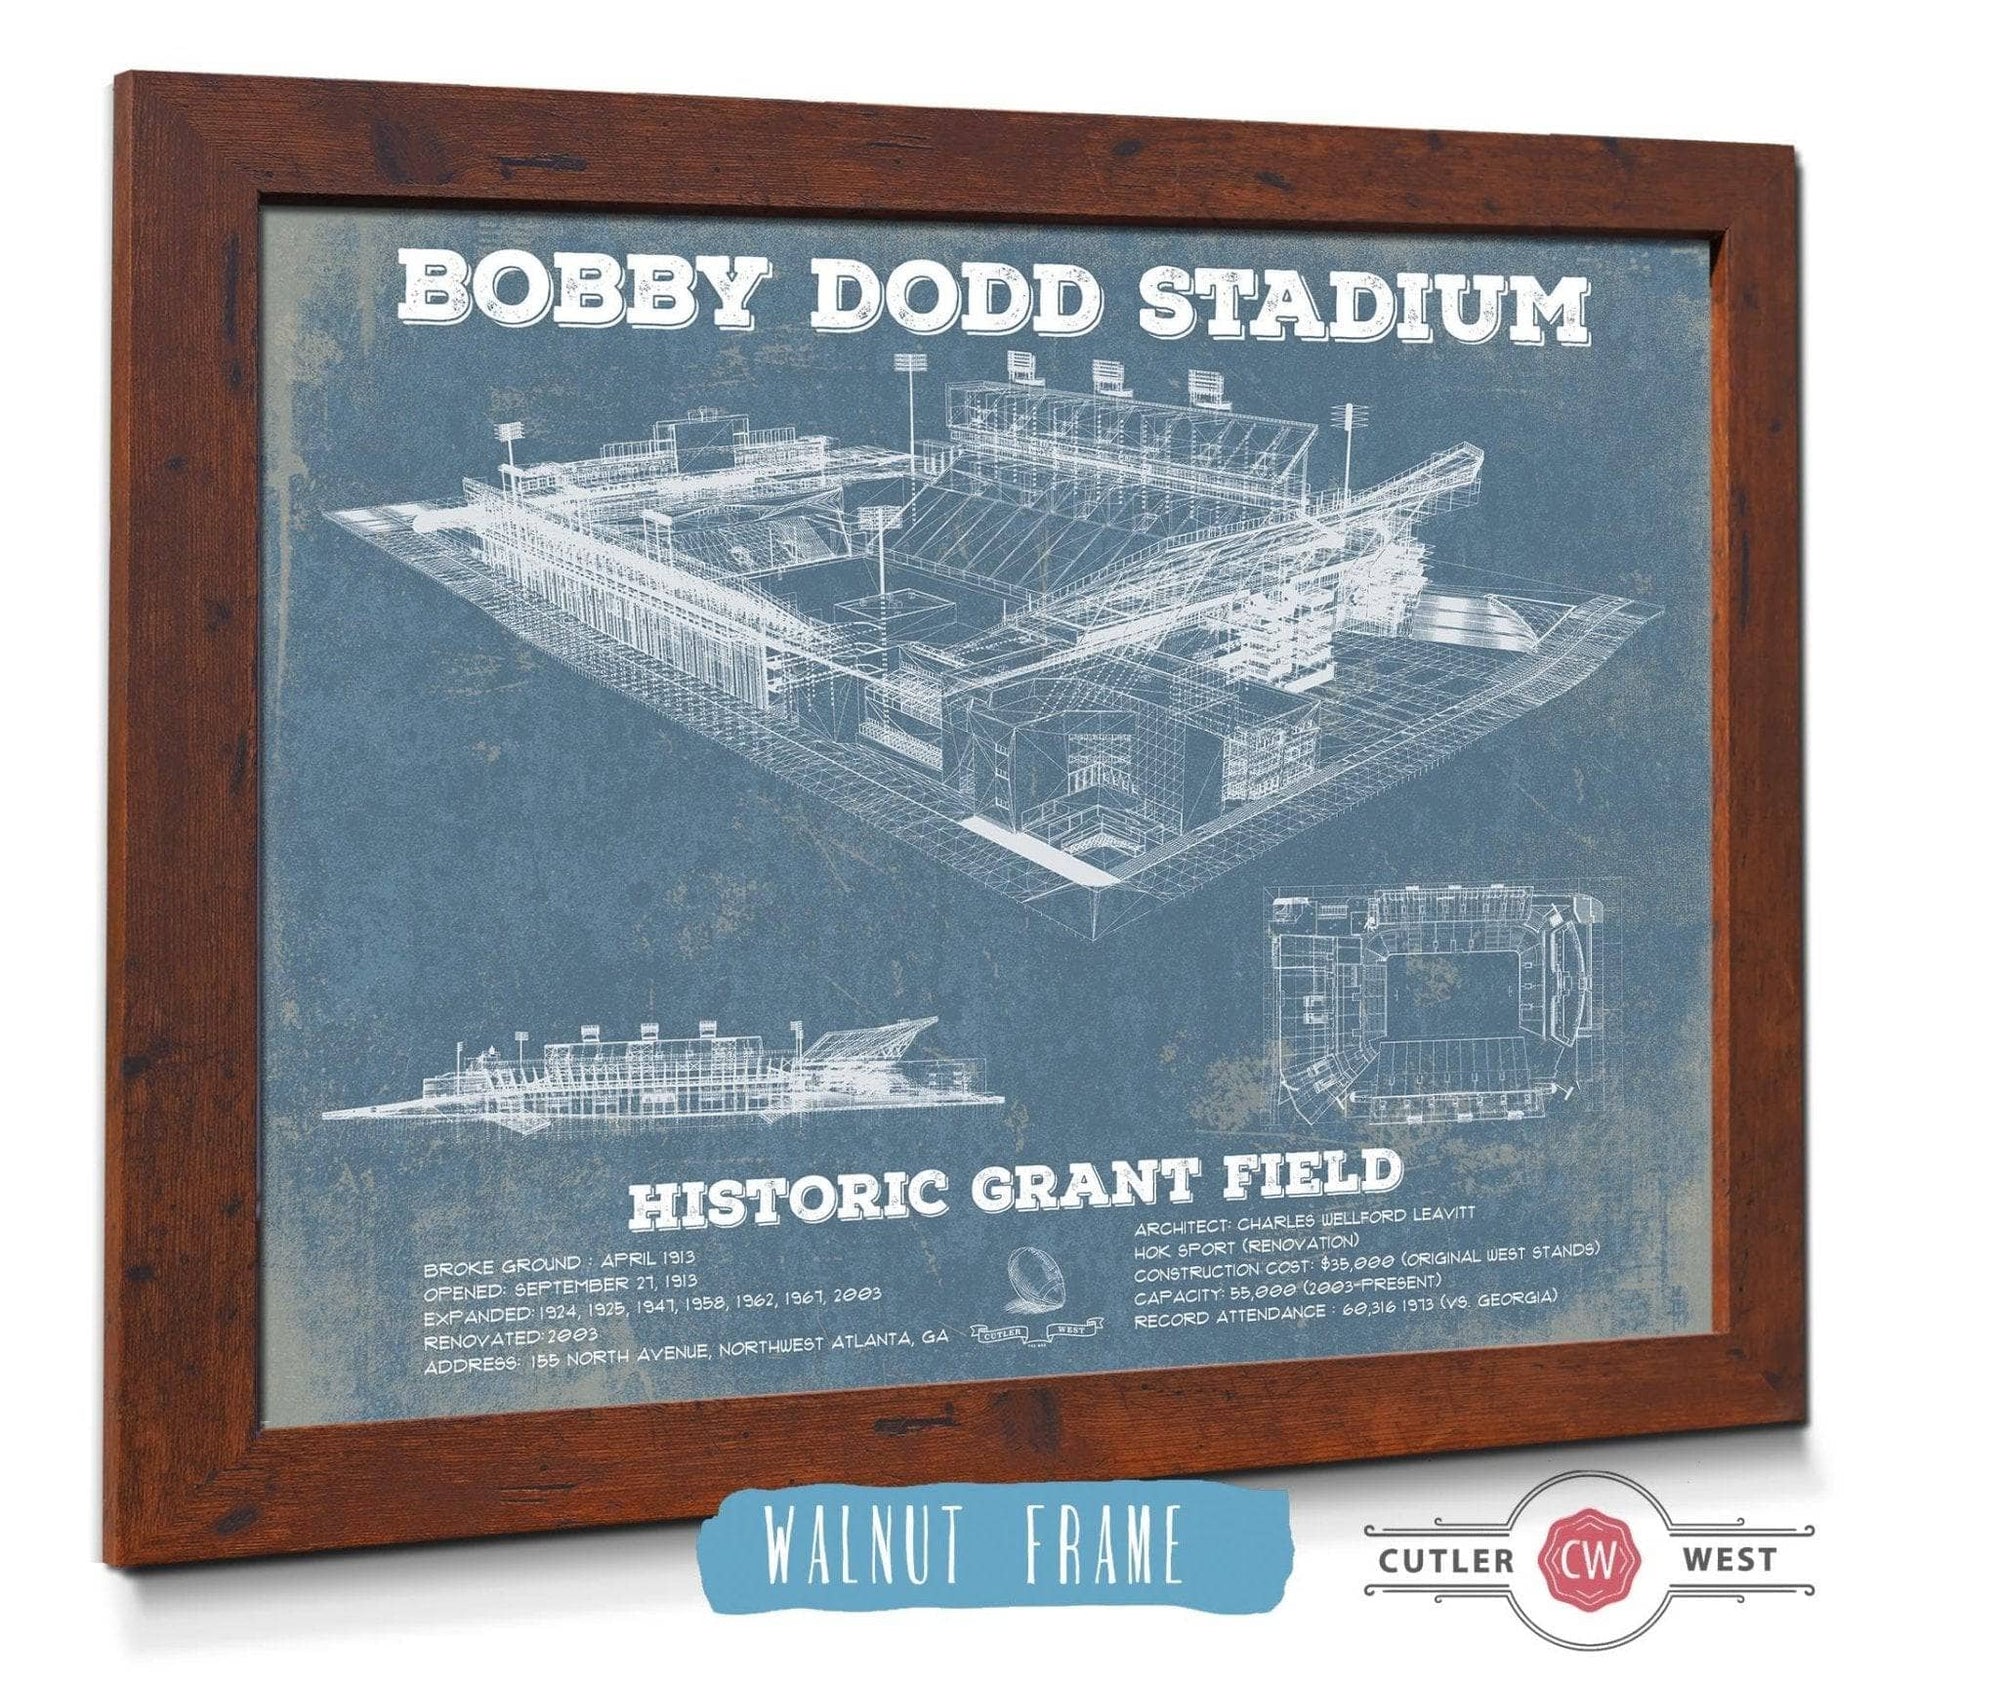 Cutler West College Football Collection 14" x 11" / Walnut Frame Georgia Tech Yellow Jackets - Bobby Dodd Stadium at Historic Grant Field 835000125_48740